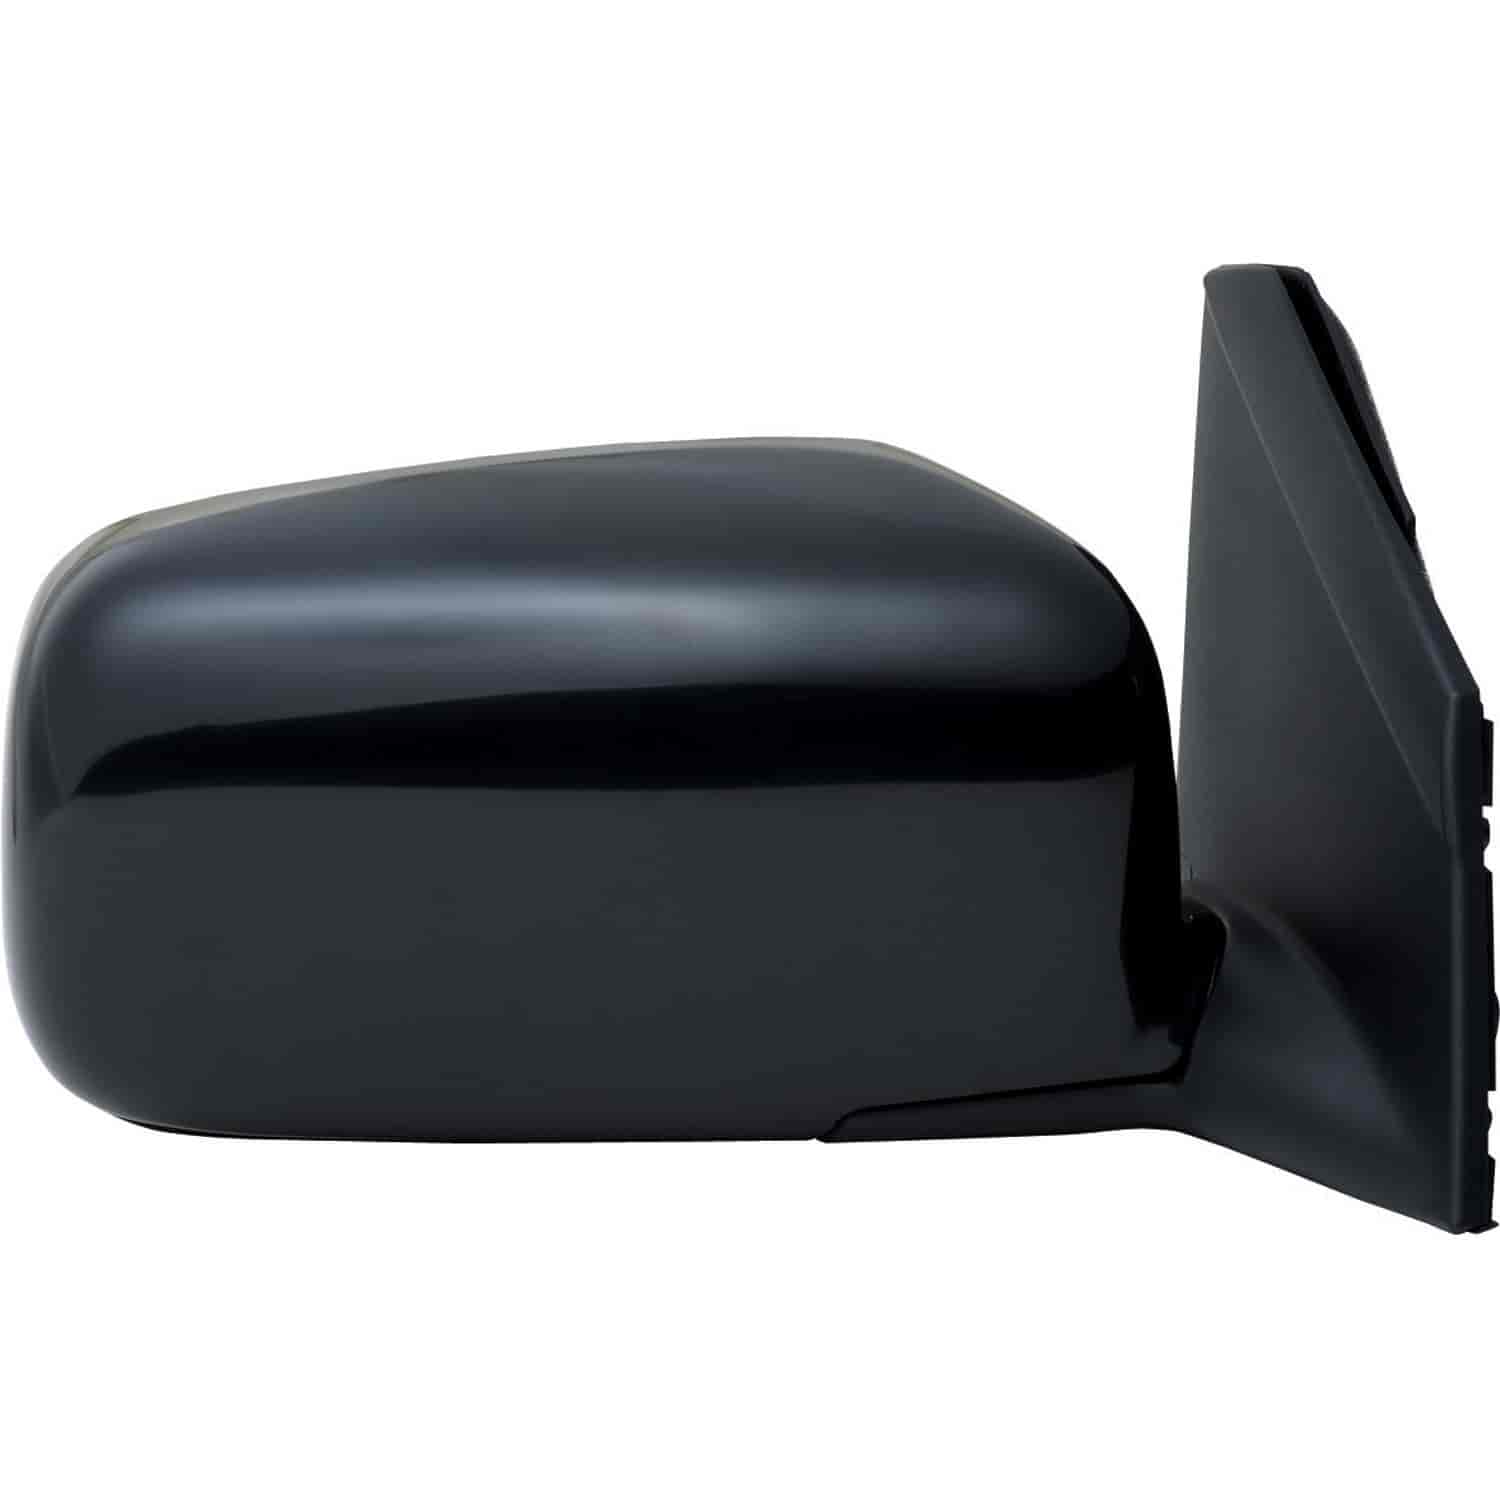 OEM Style Replacement mirror for 04-14 Nissan Titan